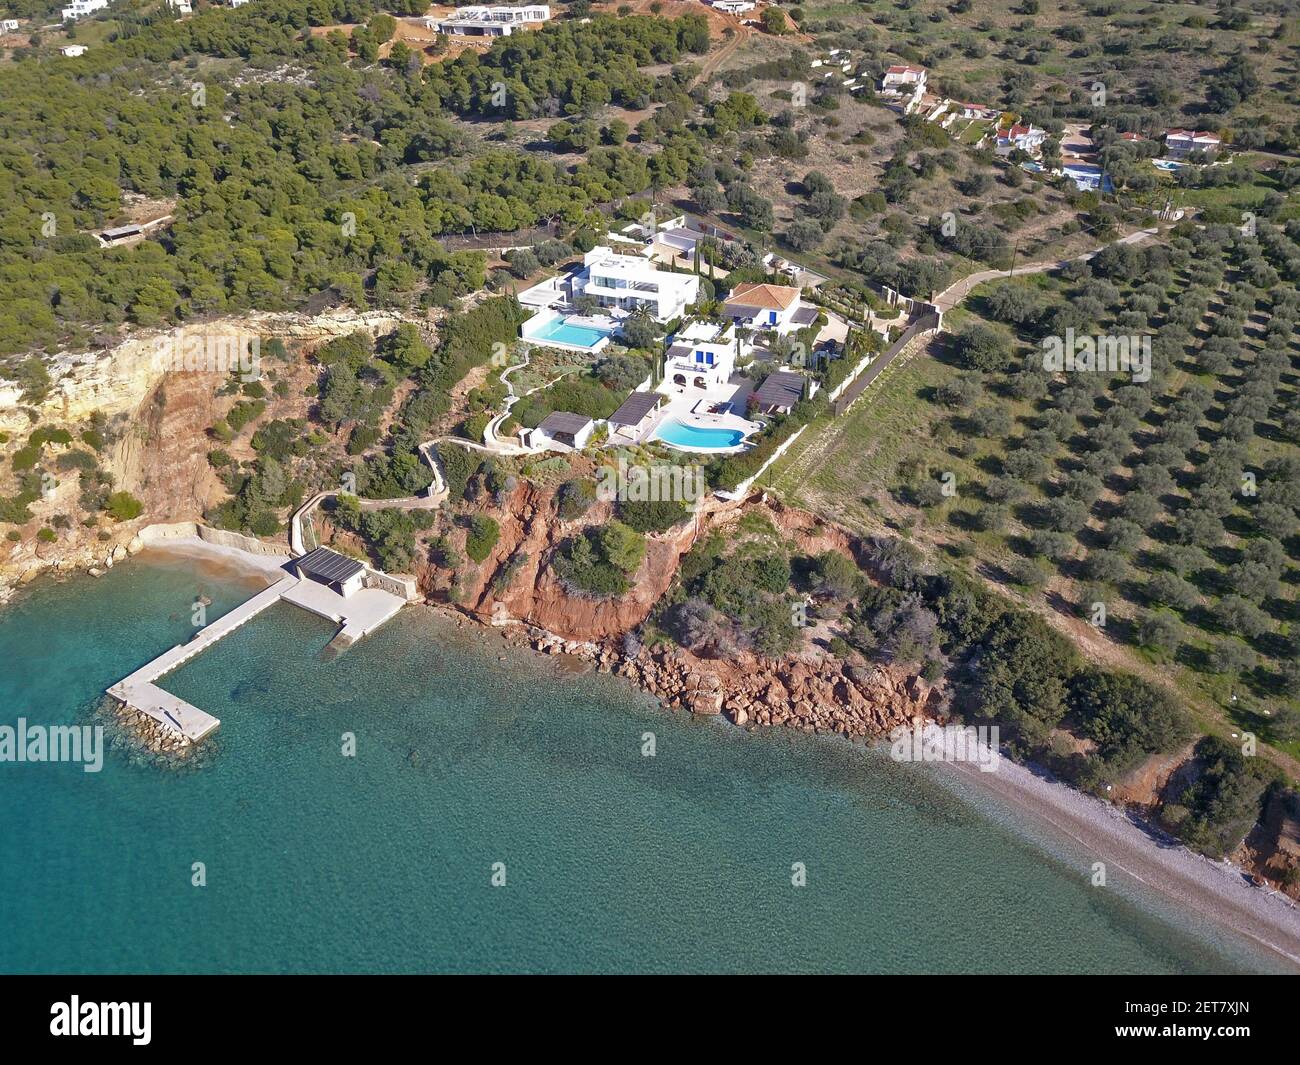 Greek holiday villa of aprox 4.5 million euro of Dutch King  Willem-Alexander and Queen Maxima in Kranidi, Doroufi at the gulf of  Argolis in Greece on December 21, 2018. The villa is